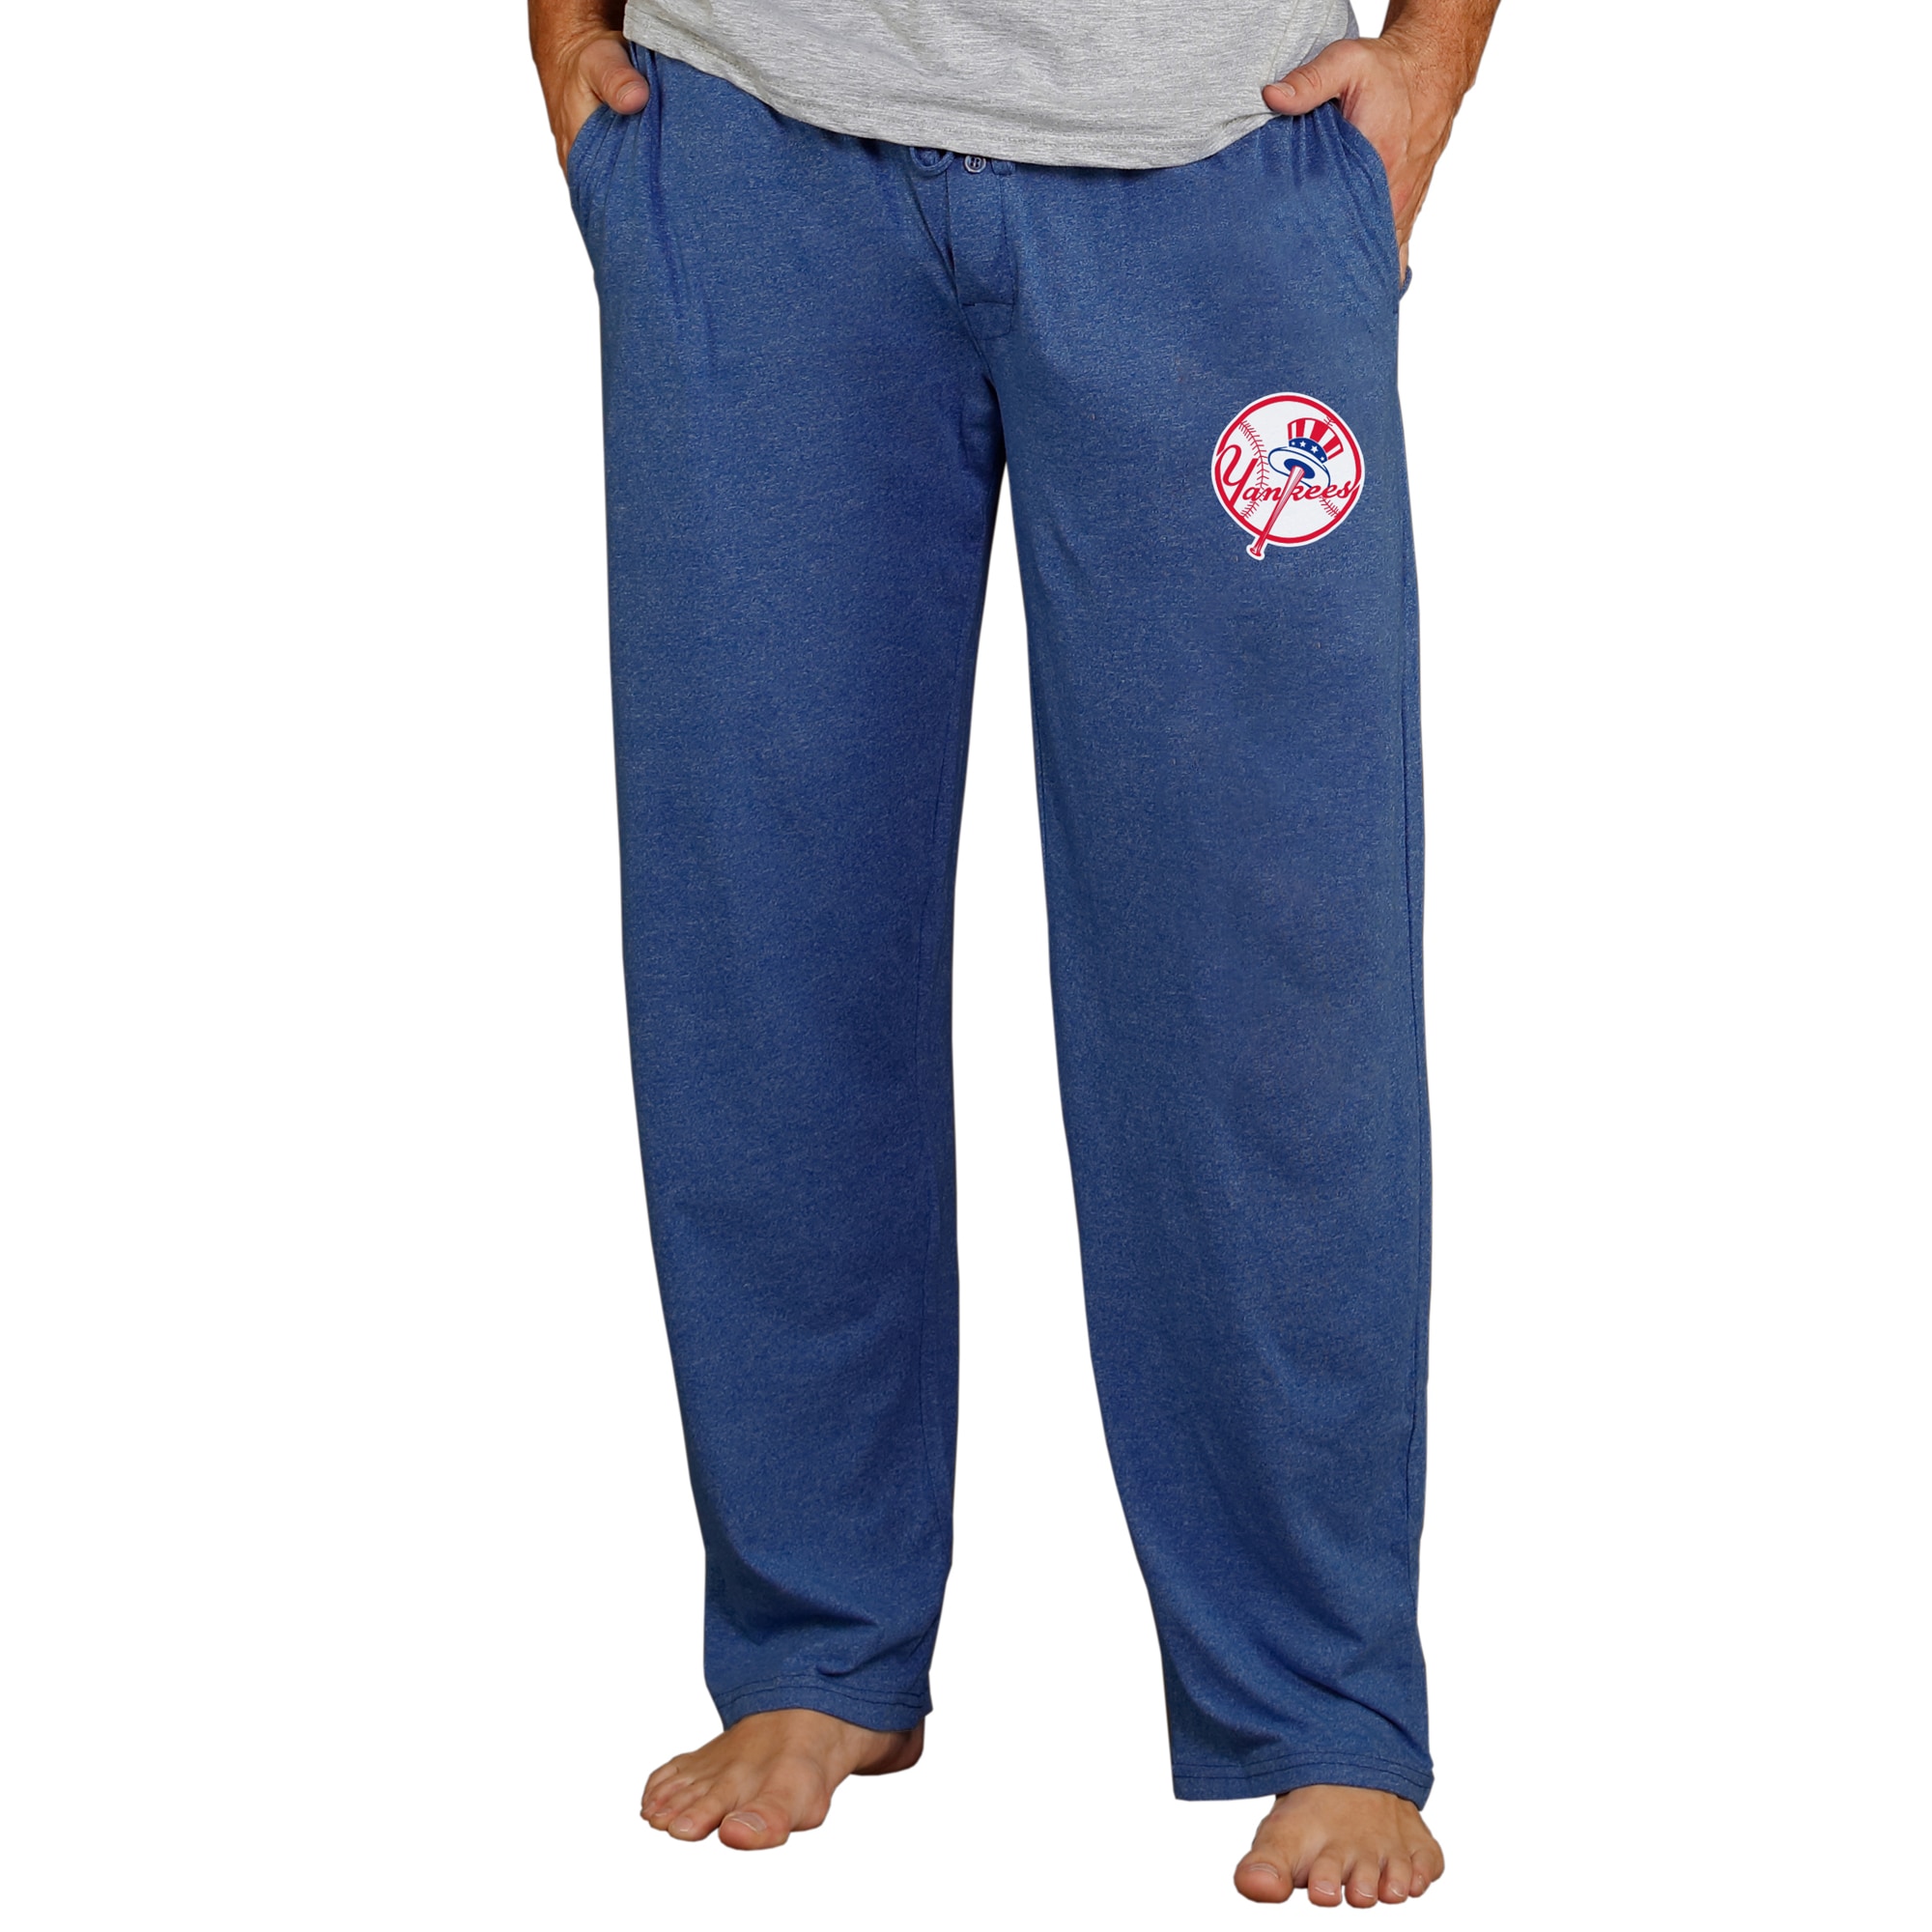 Men's Concepts Sport Navy New York Yankees Cooperstown Quest Lounge Pants - image 1 of 1